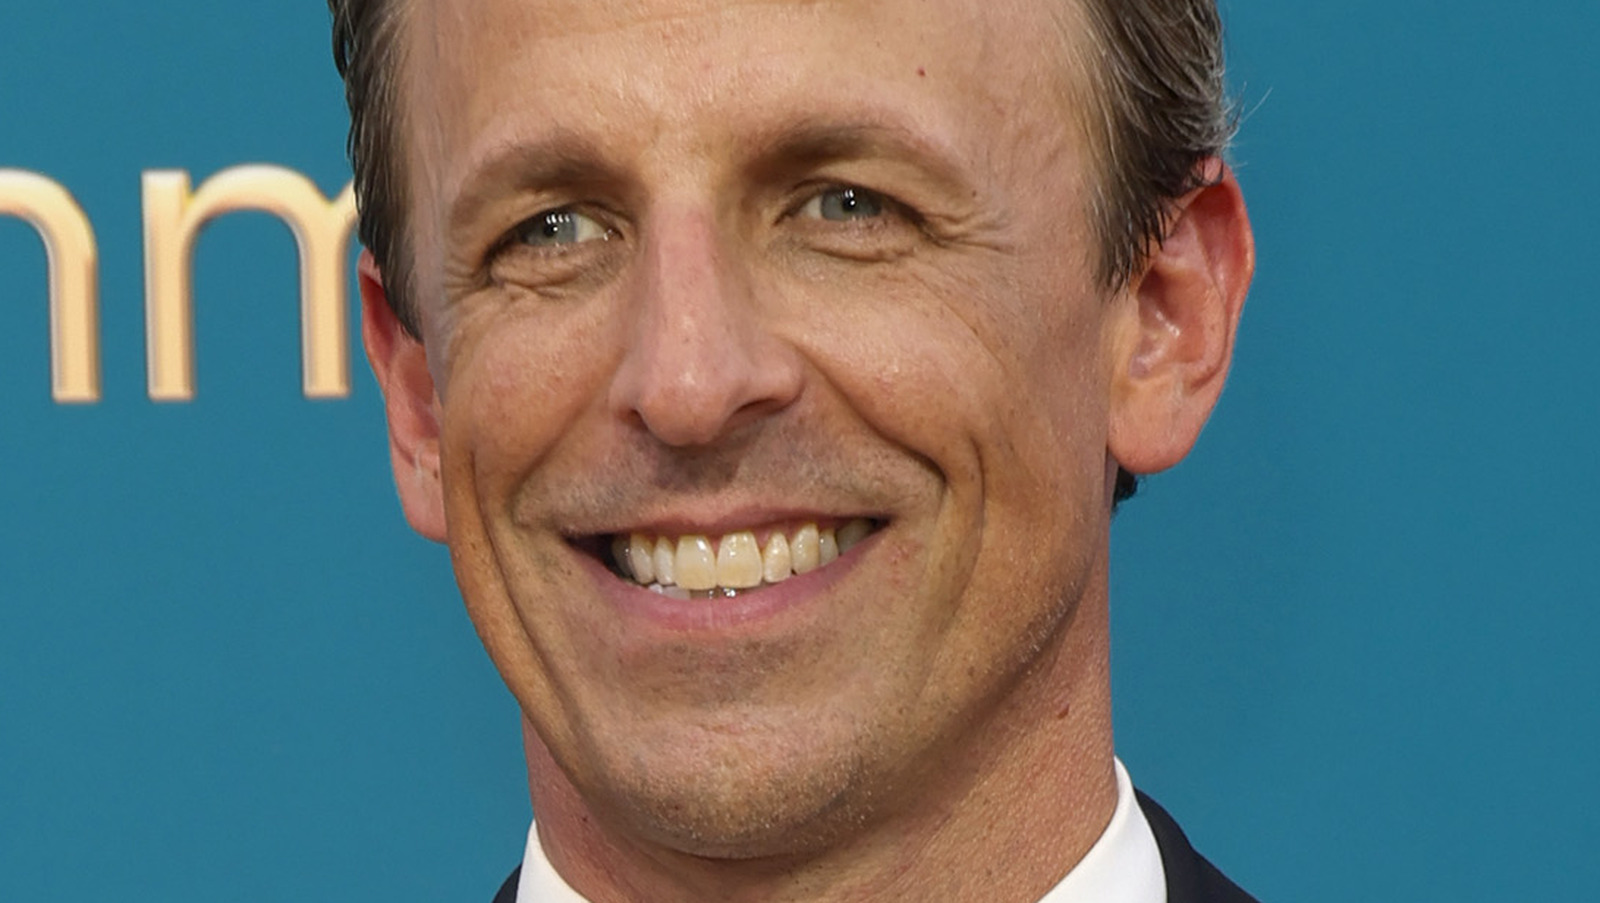 Seth Meyers’ 2022 Emmys Appearance Has People Talking For All The Wrong Reasons